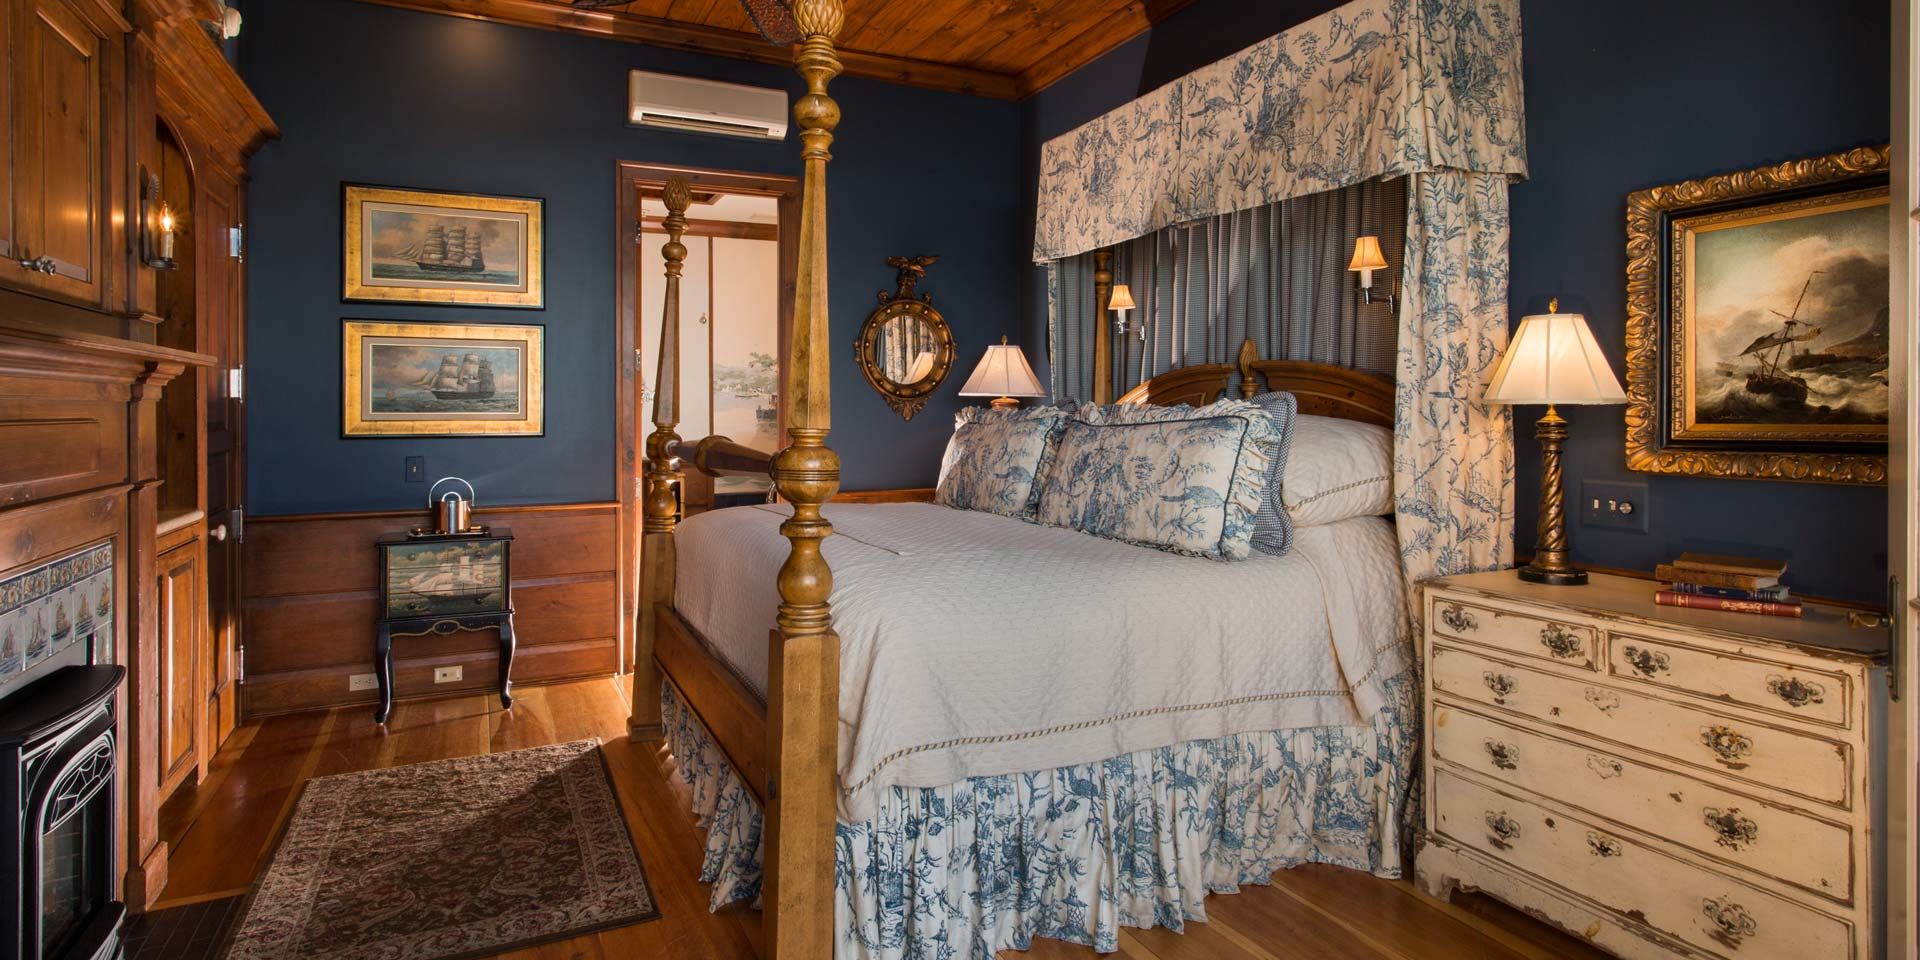 Characteristic of the seaport homes of Nantucket, the Nantucket Guest Room will certainly take you back to the whaling era and Herman Melville’s Moby Dick